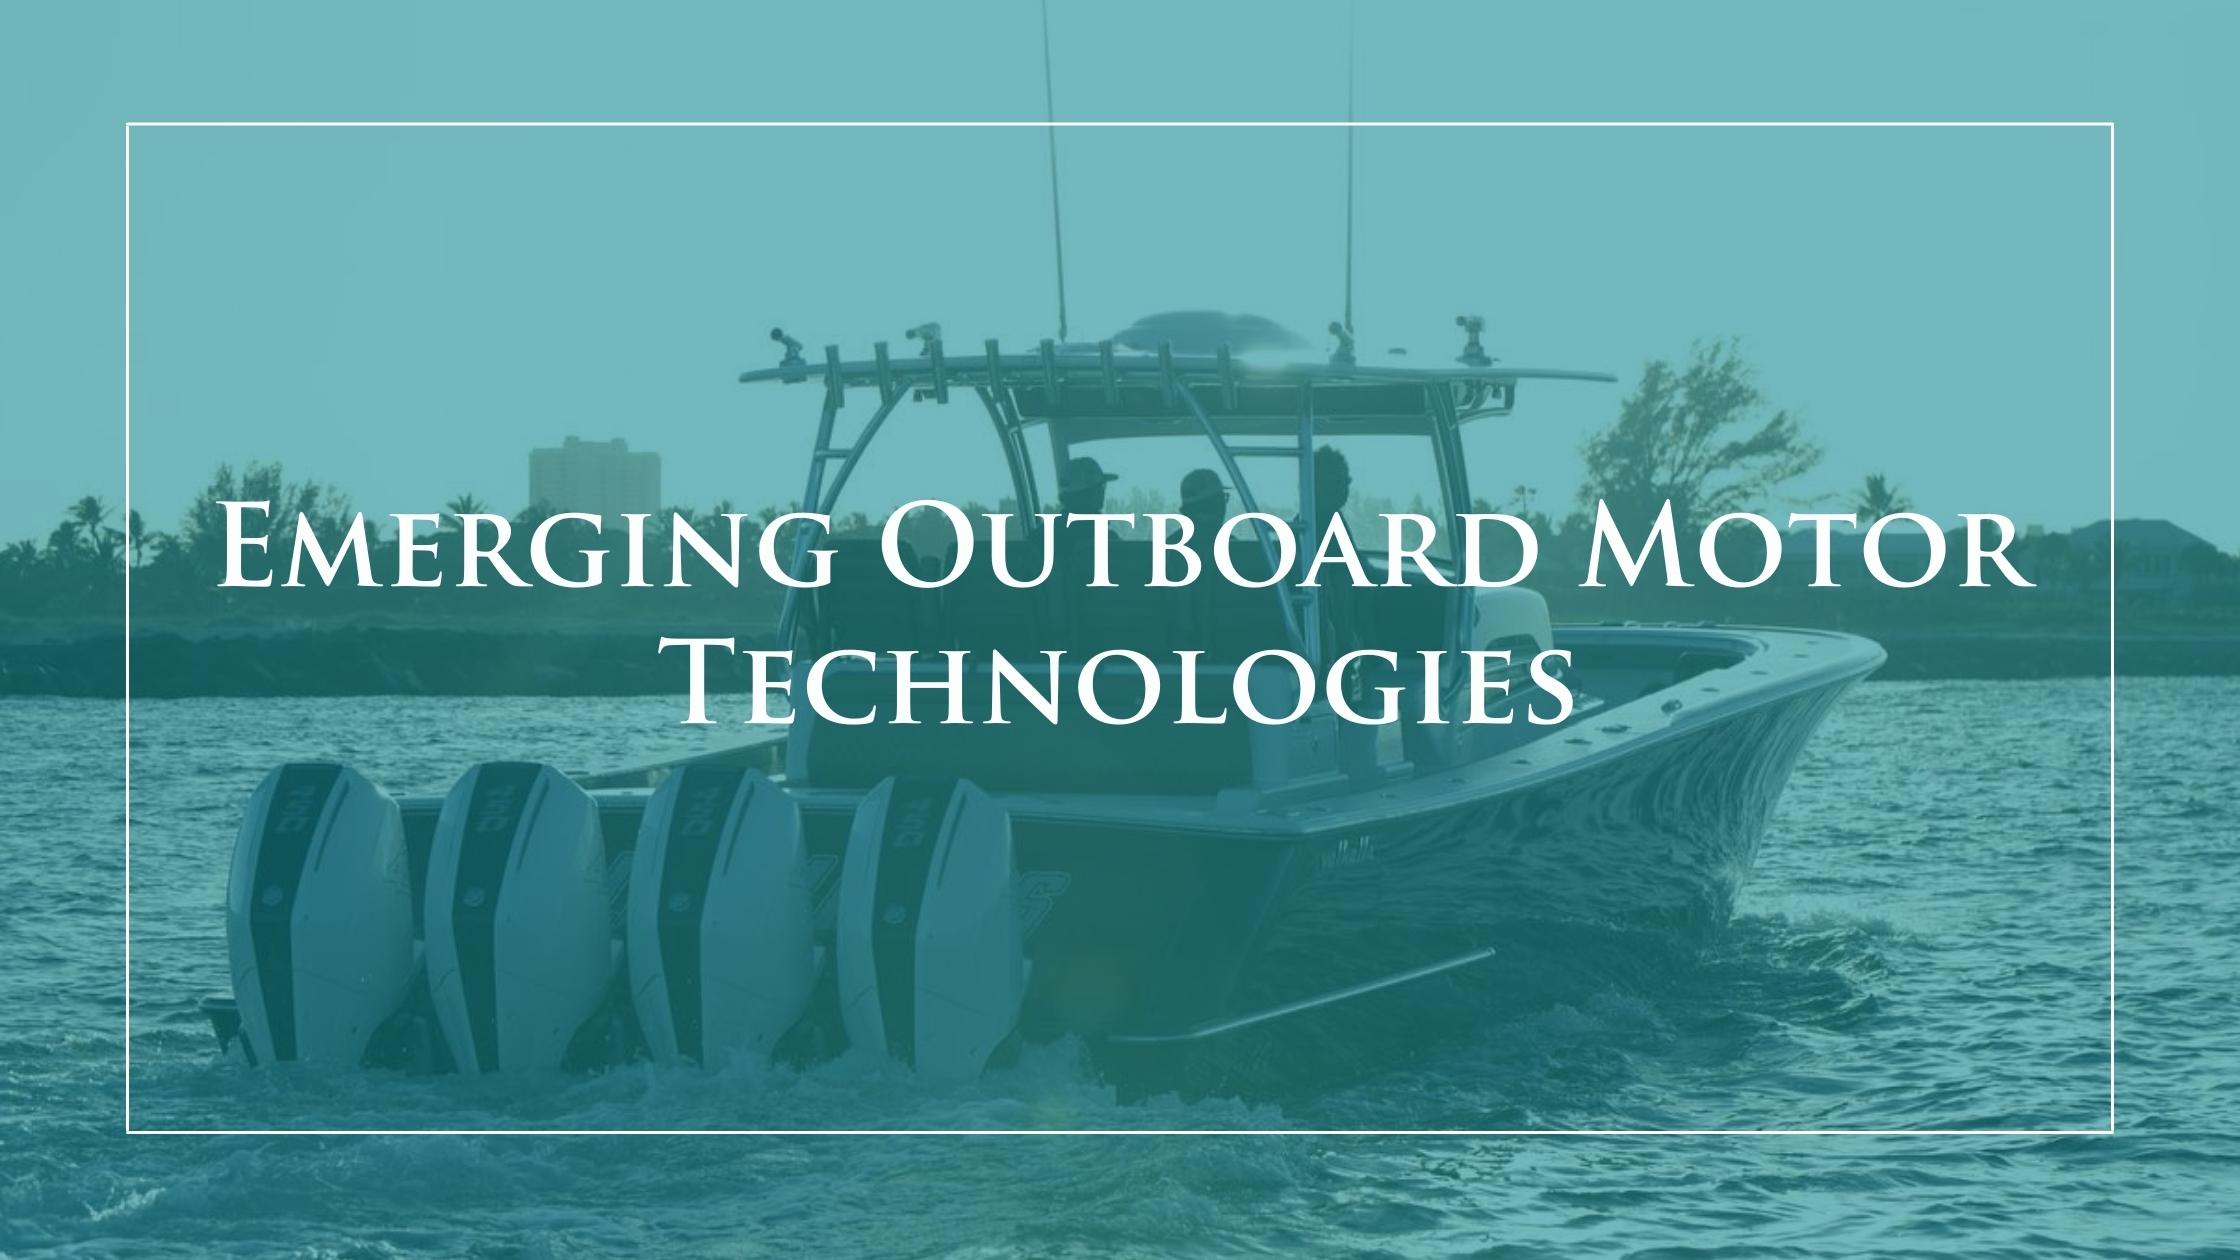 Improvements of Outboard Motor Technologies